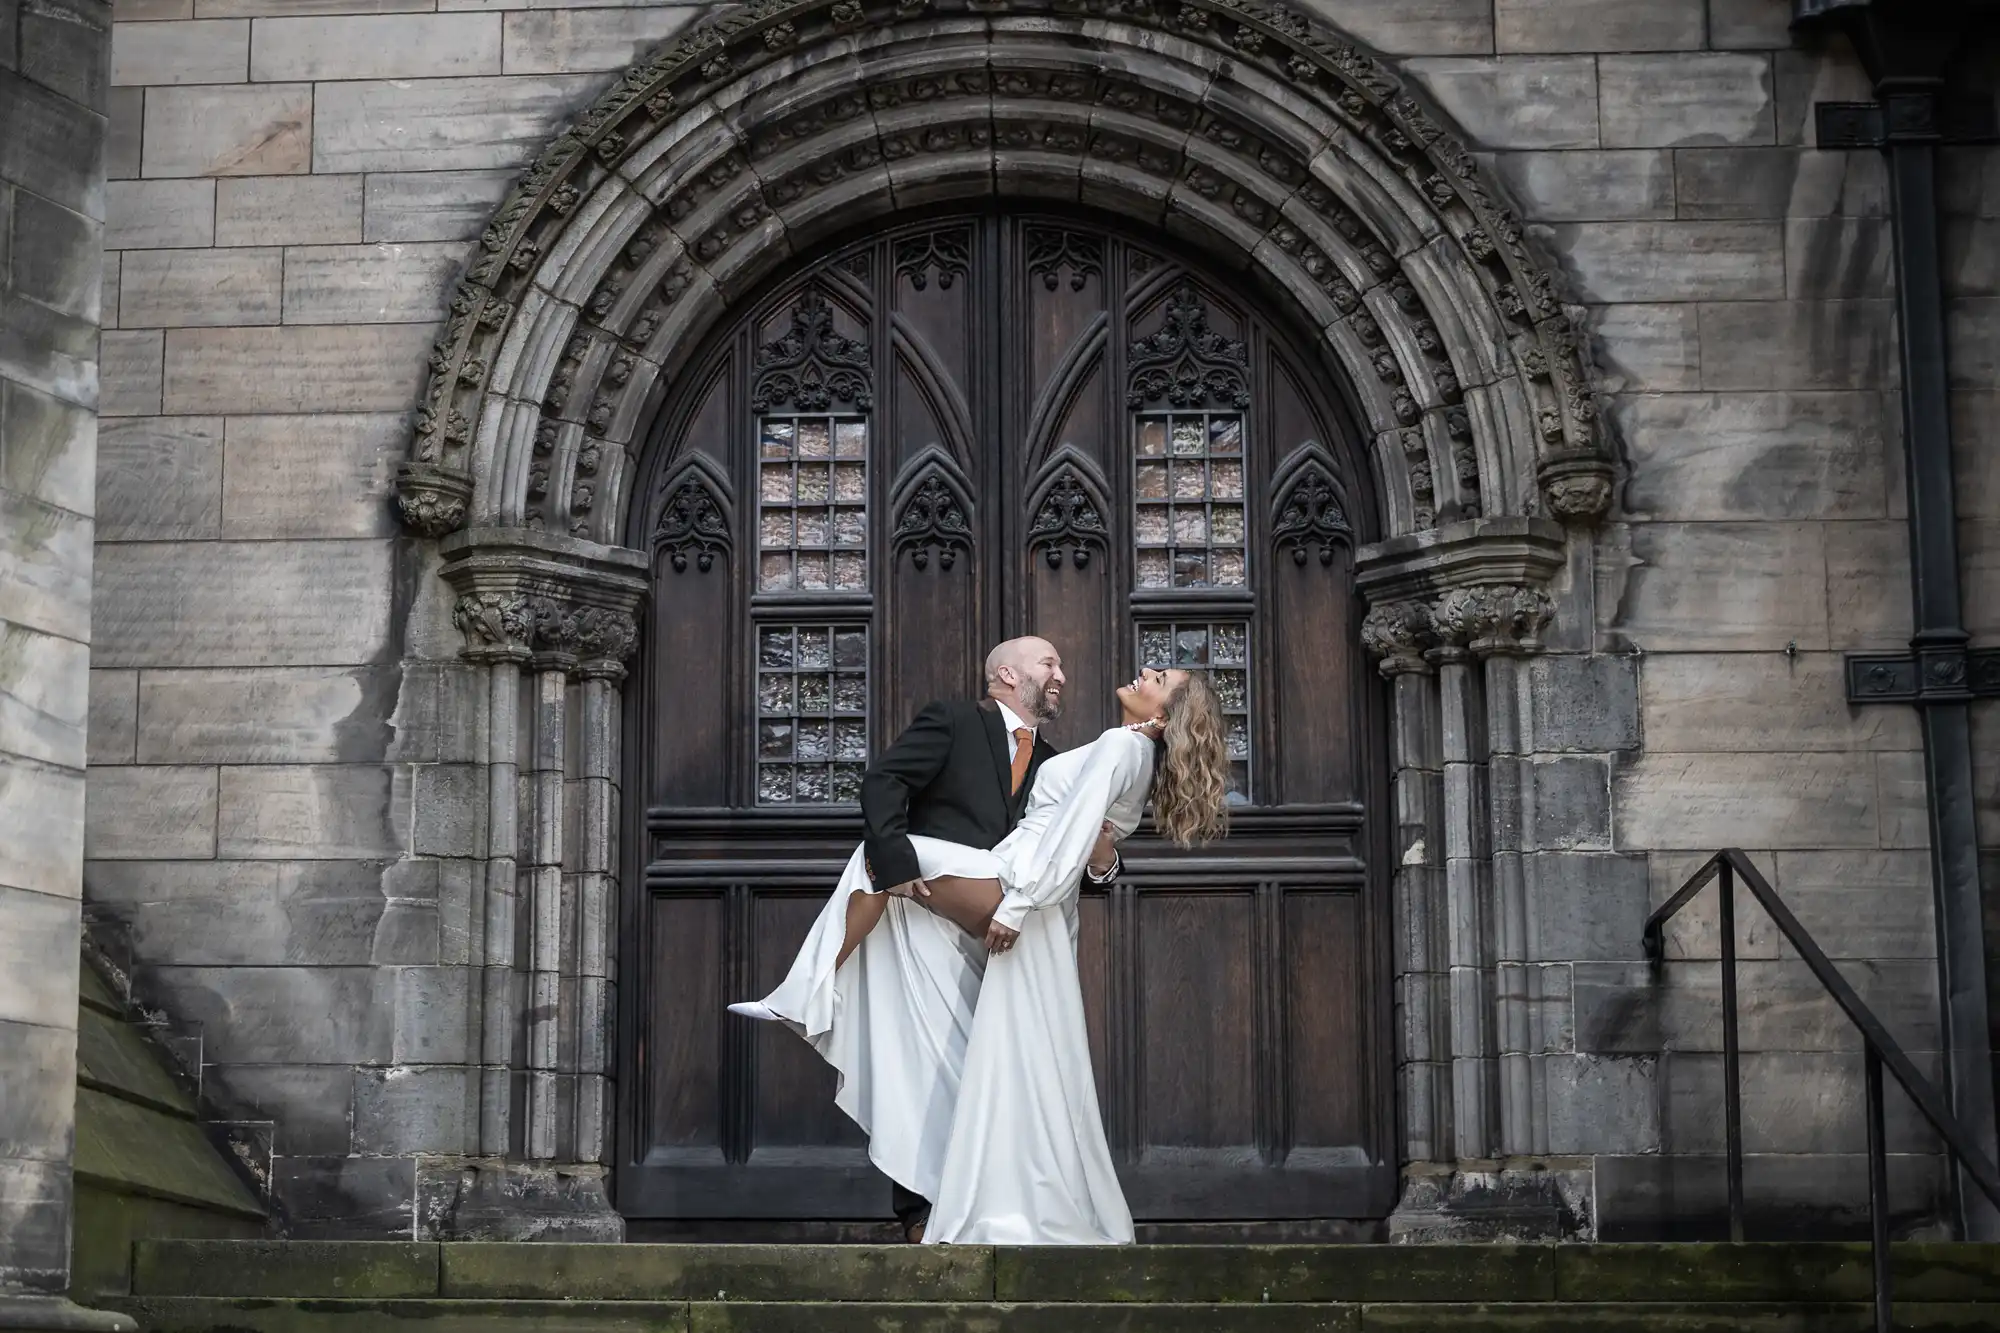 City Chambers newlyweds Sara and Carl on the steps of St Giles Cathedral